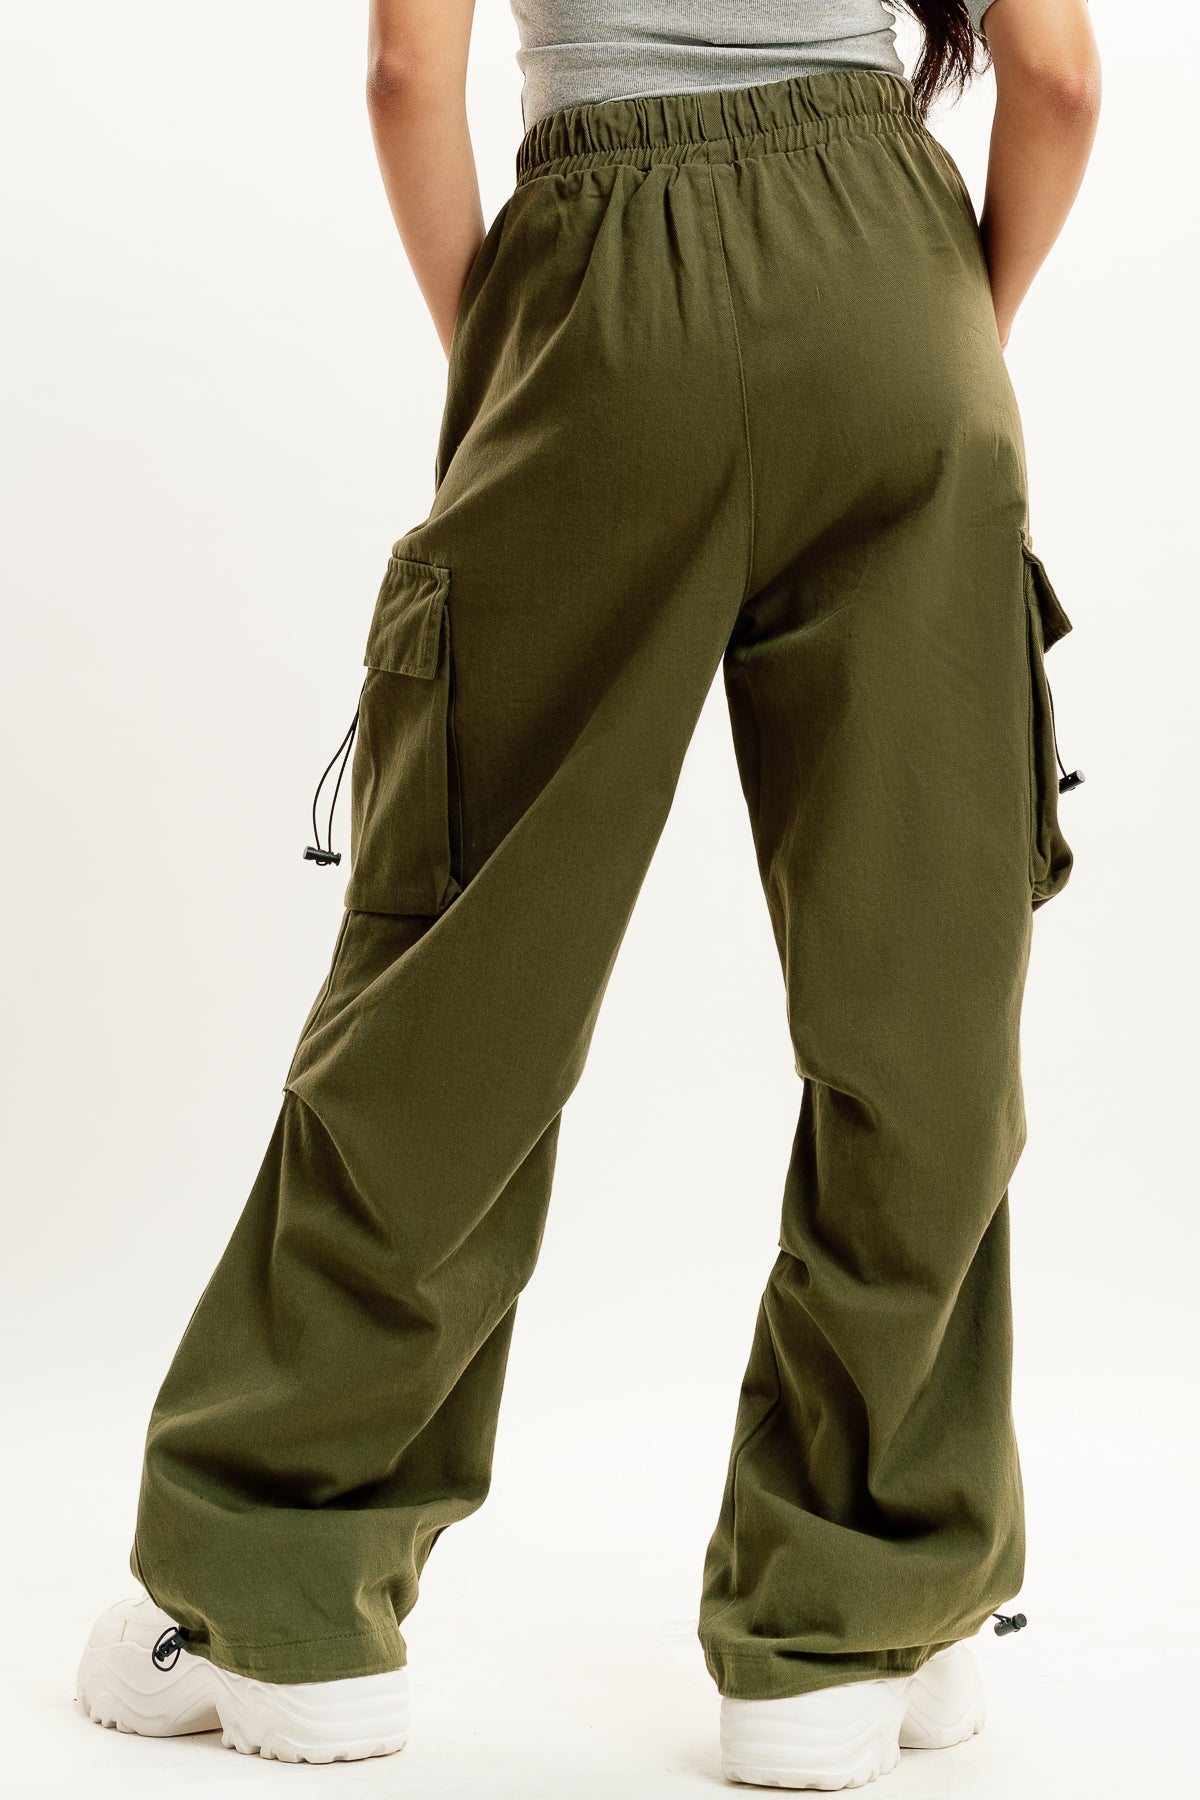 Army Green Cargo Pants for Women Baggy High Waisted Travel Tactical  Streetwear Casual Outdoor Relaxed Fit Jogger Pants : Sports & Outdoors -  Amazon.com